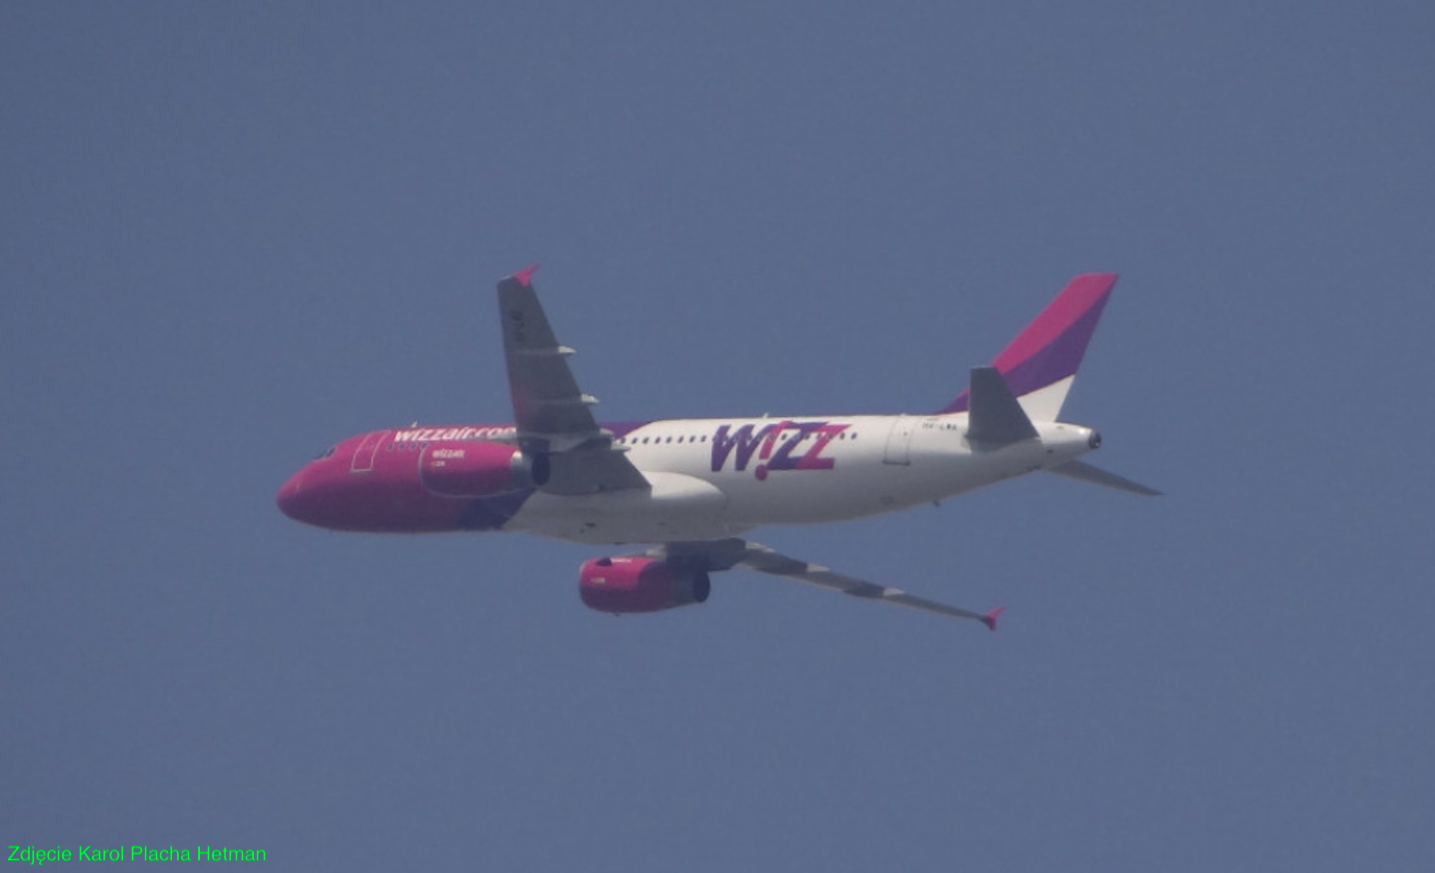 Wizz Air A-320 departs from Lublin Airport. 2016 year. Photo by Karol Placha Hetman